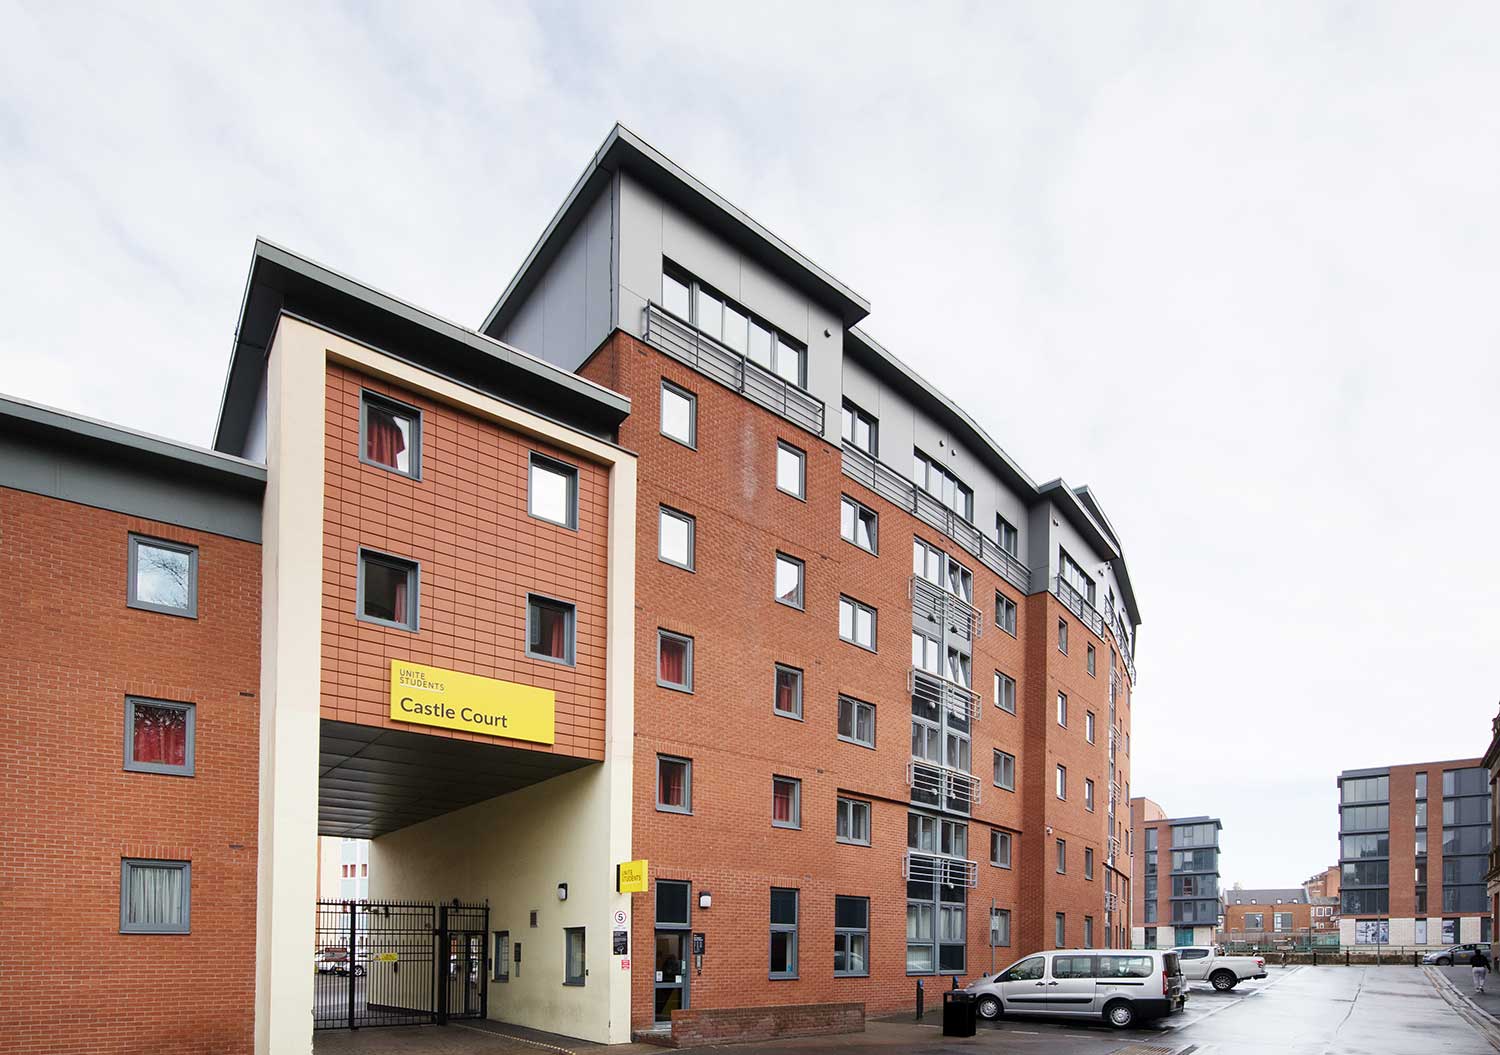 Unite Students accommodation at Castle Court in Leicester